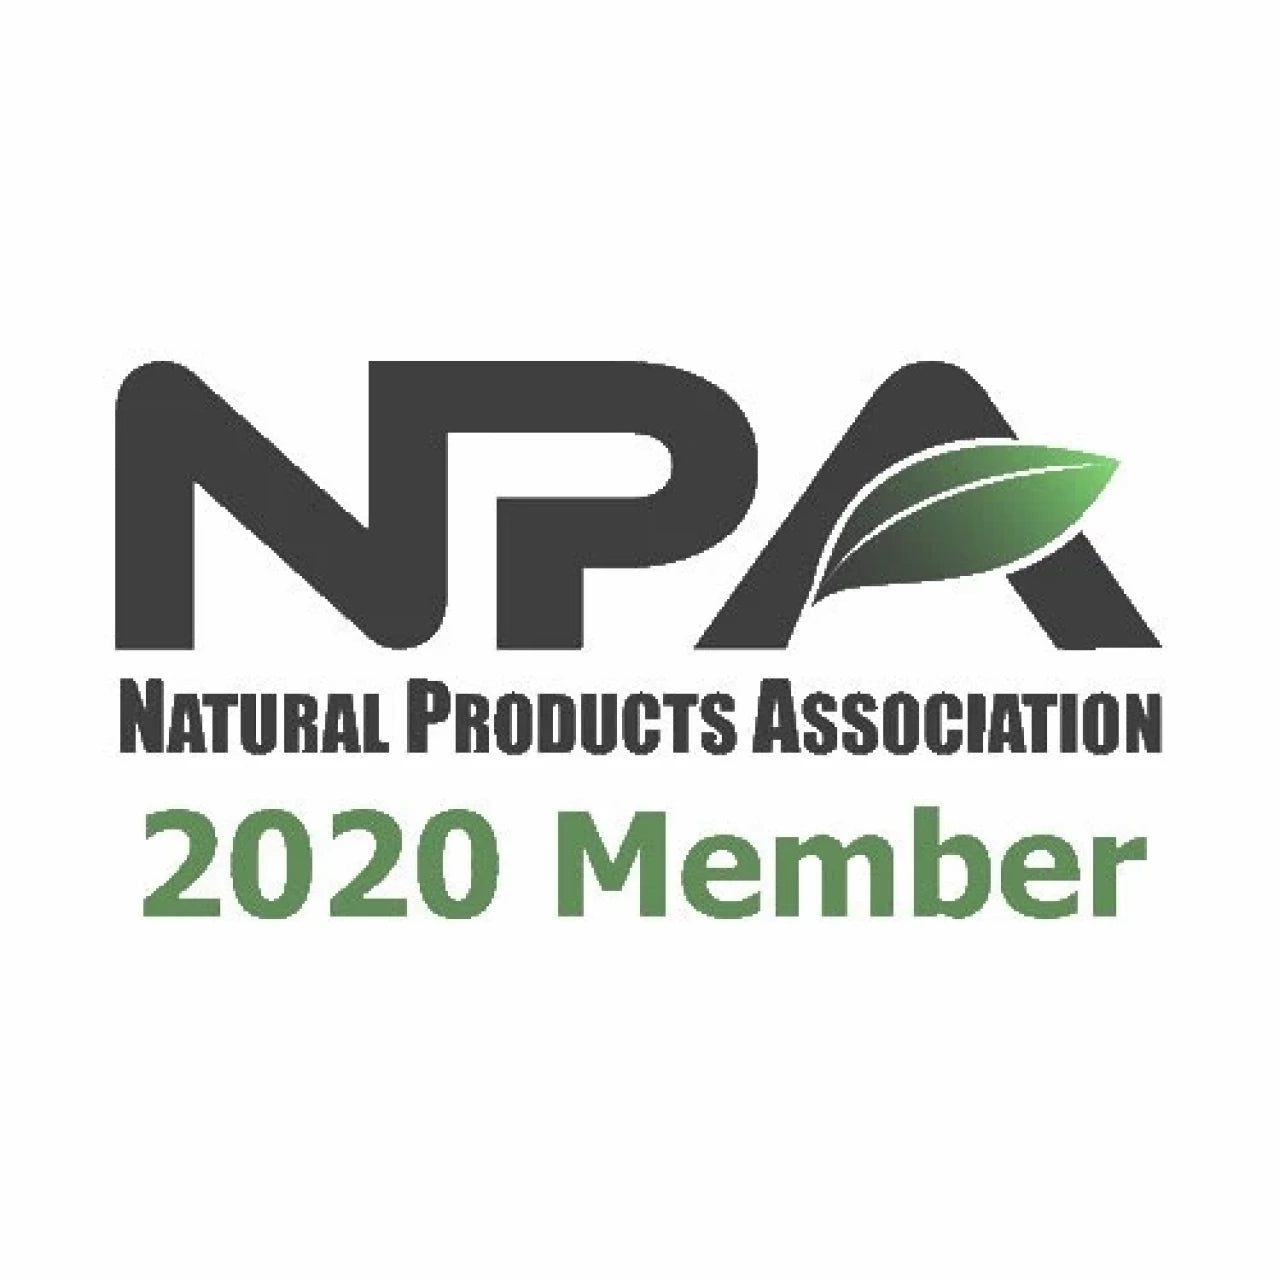 Logo of Natural Products Association with text '2020 Member' and a green leaf design.